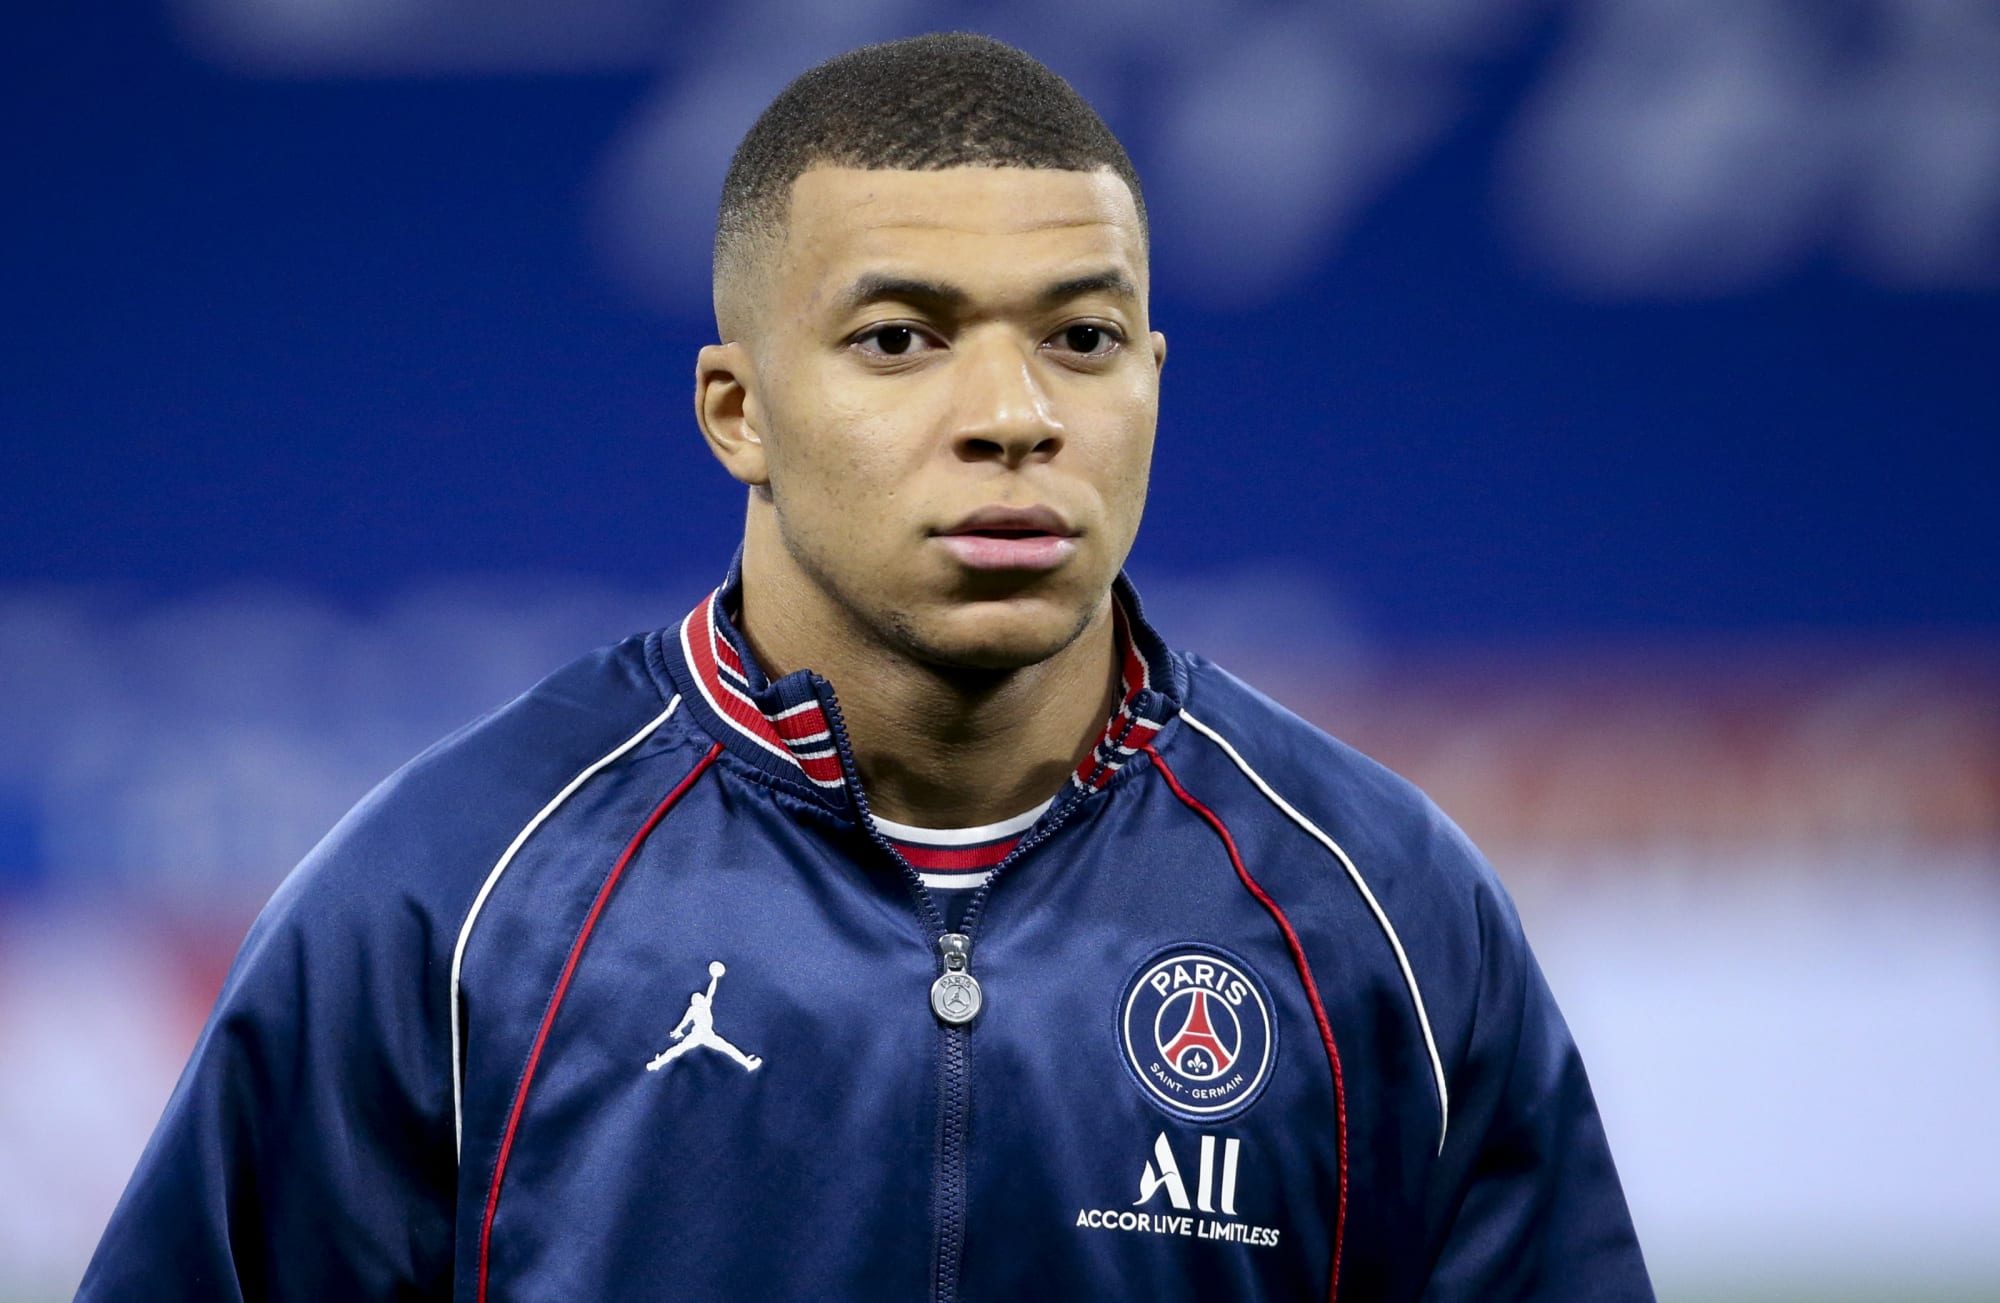 Real Madrid fans rightfully enraged at the conclusion of the Kylian Mbappe transfer saga